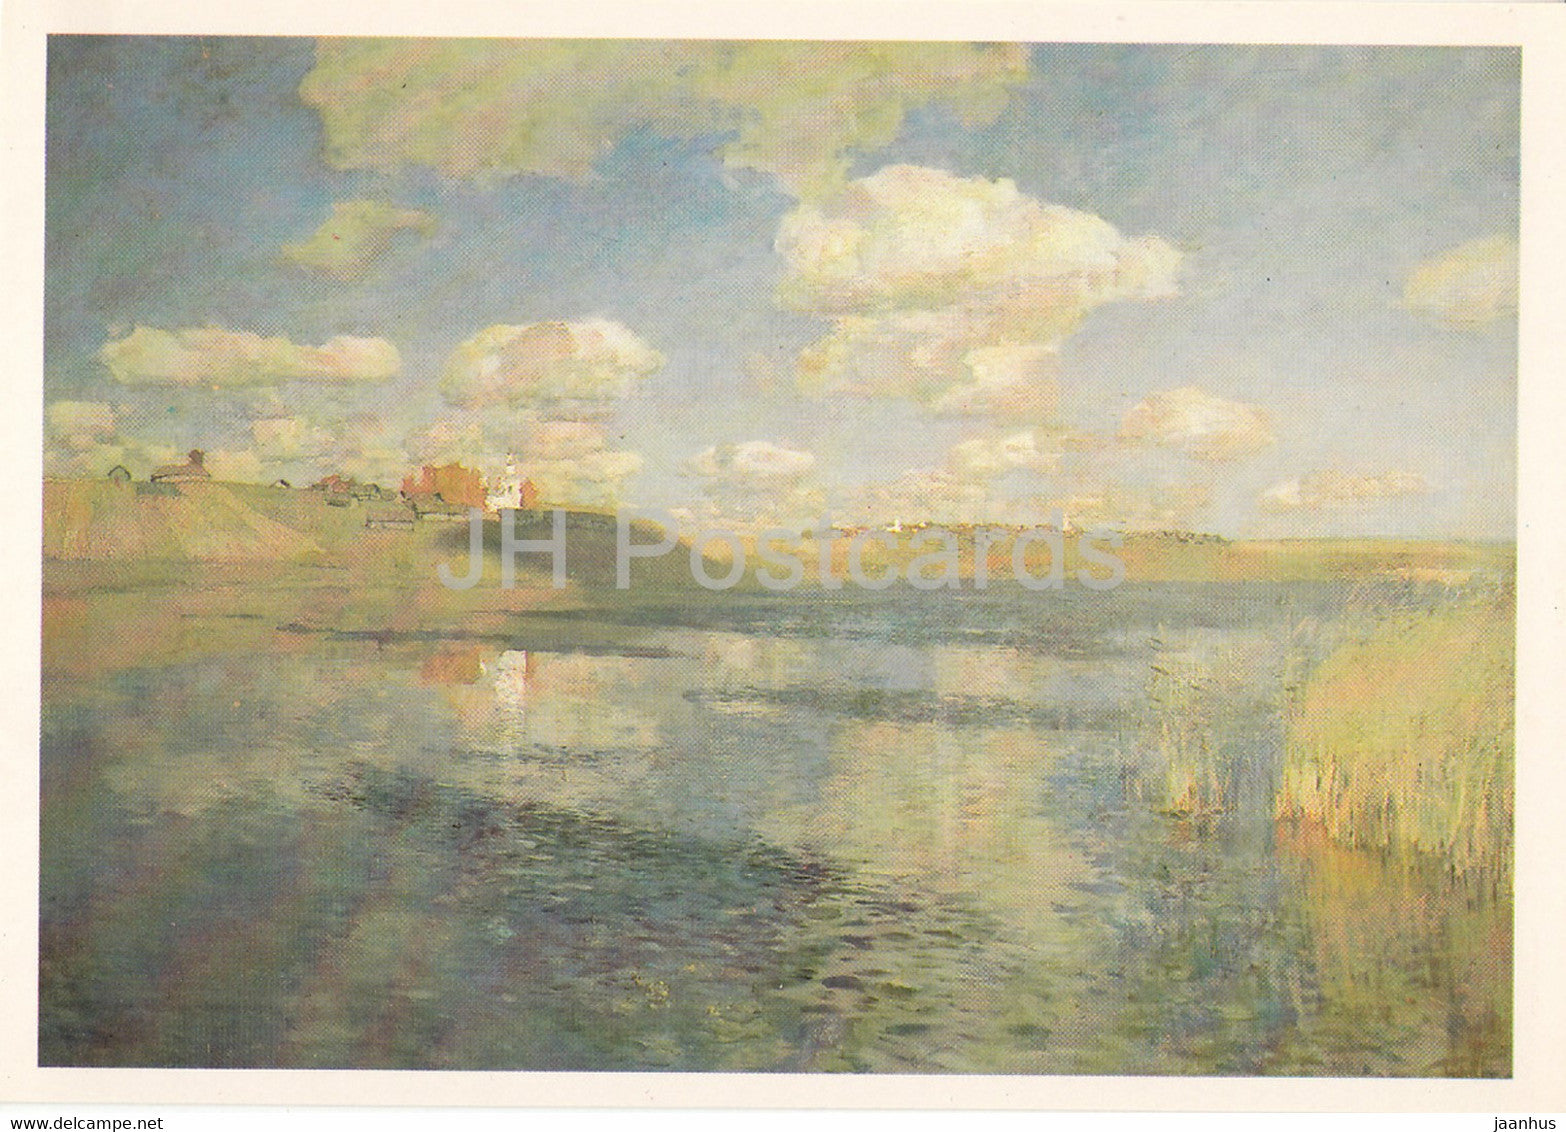 painting by I. Levitan - Lake - Russian art - 1985 - Russia USSR - used - JH Postcards